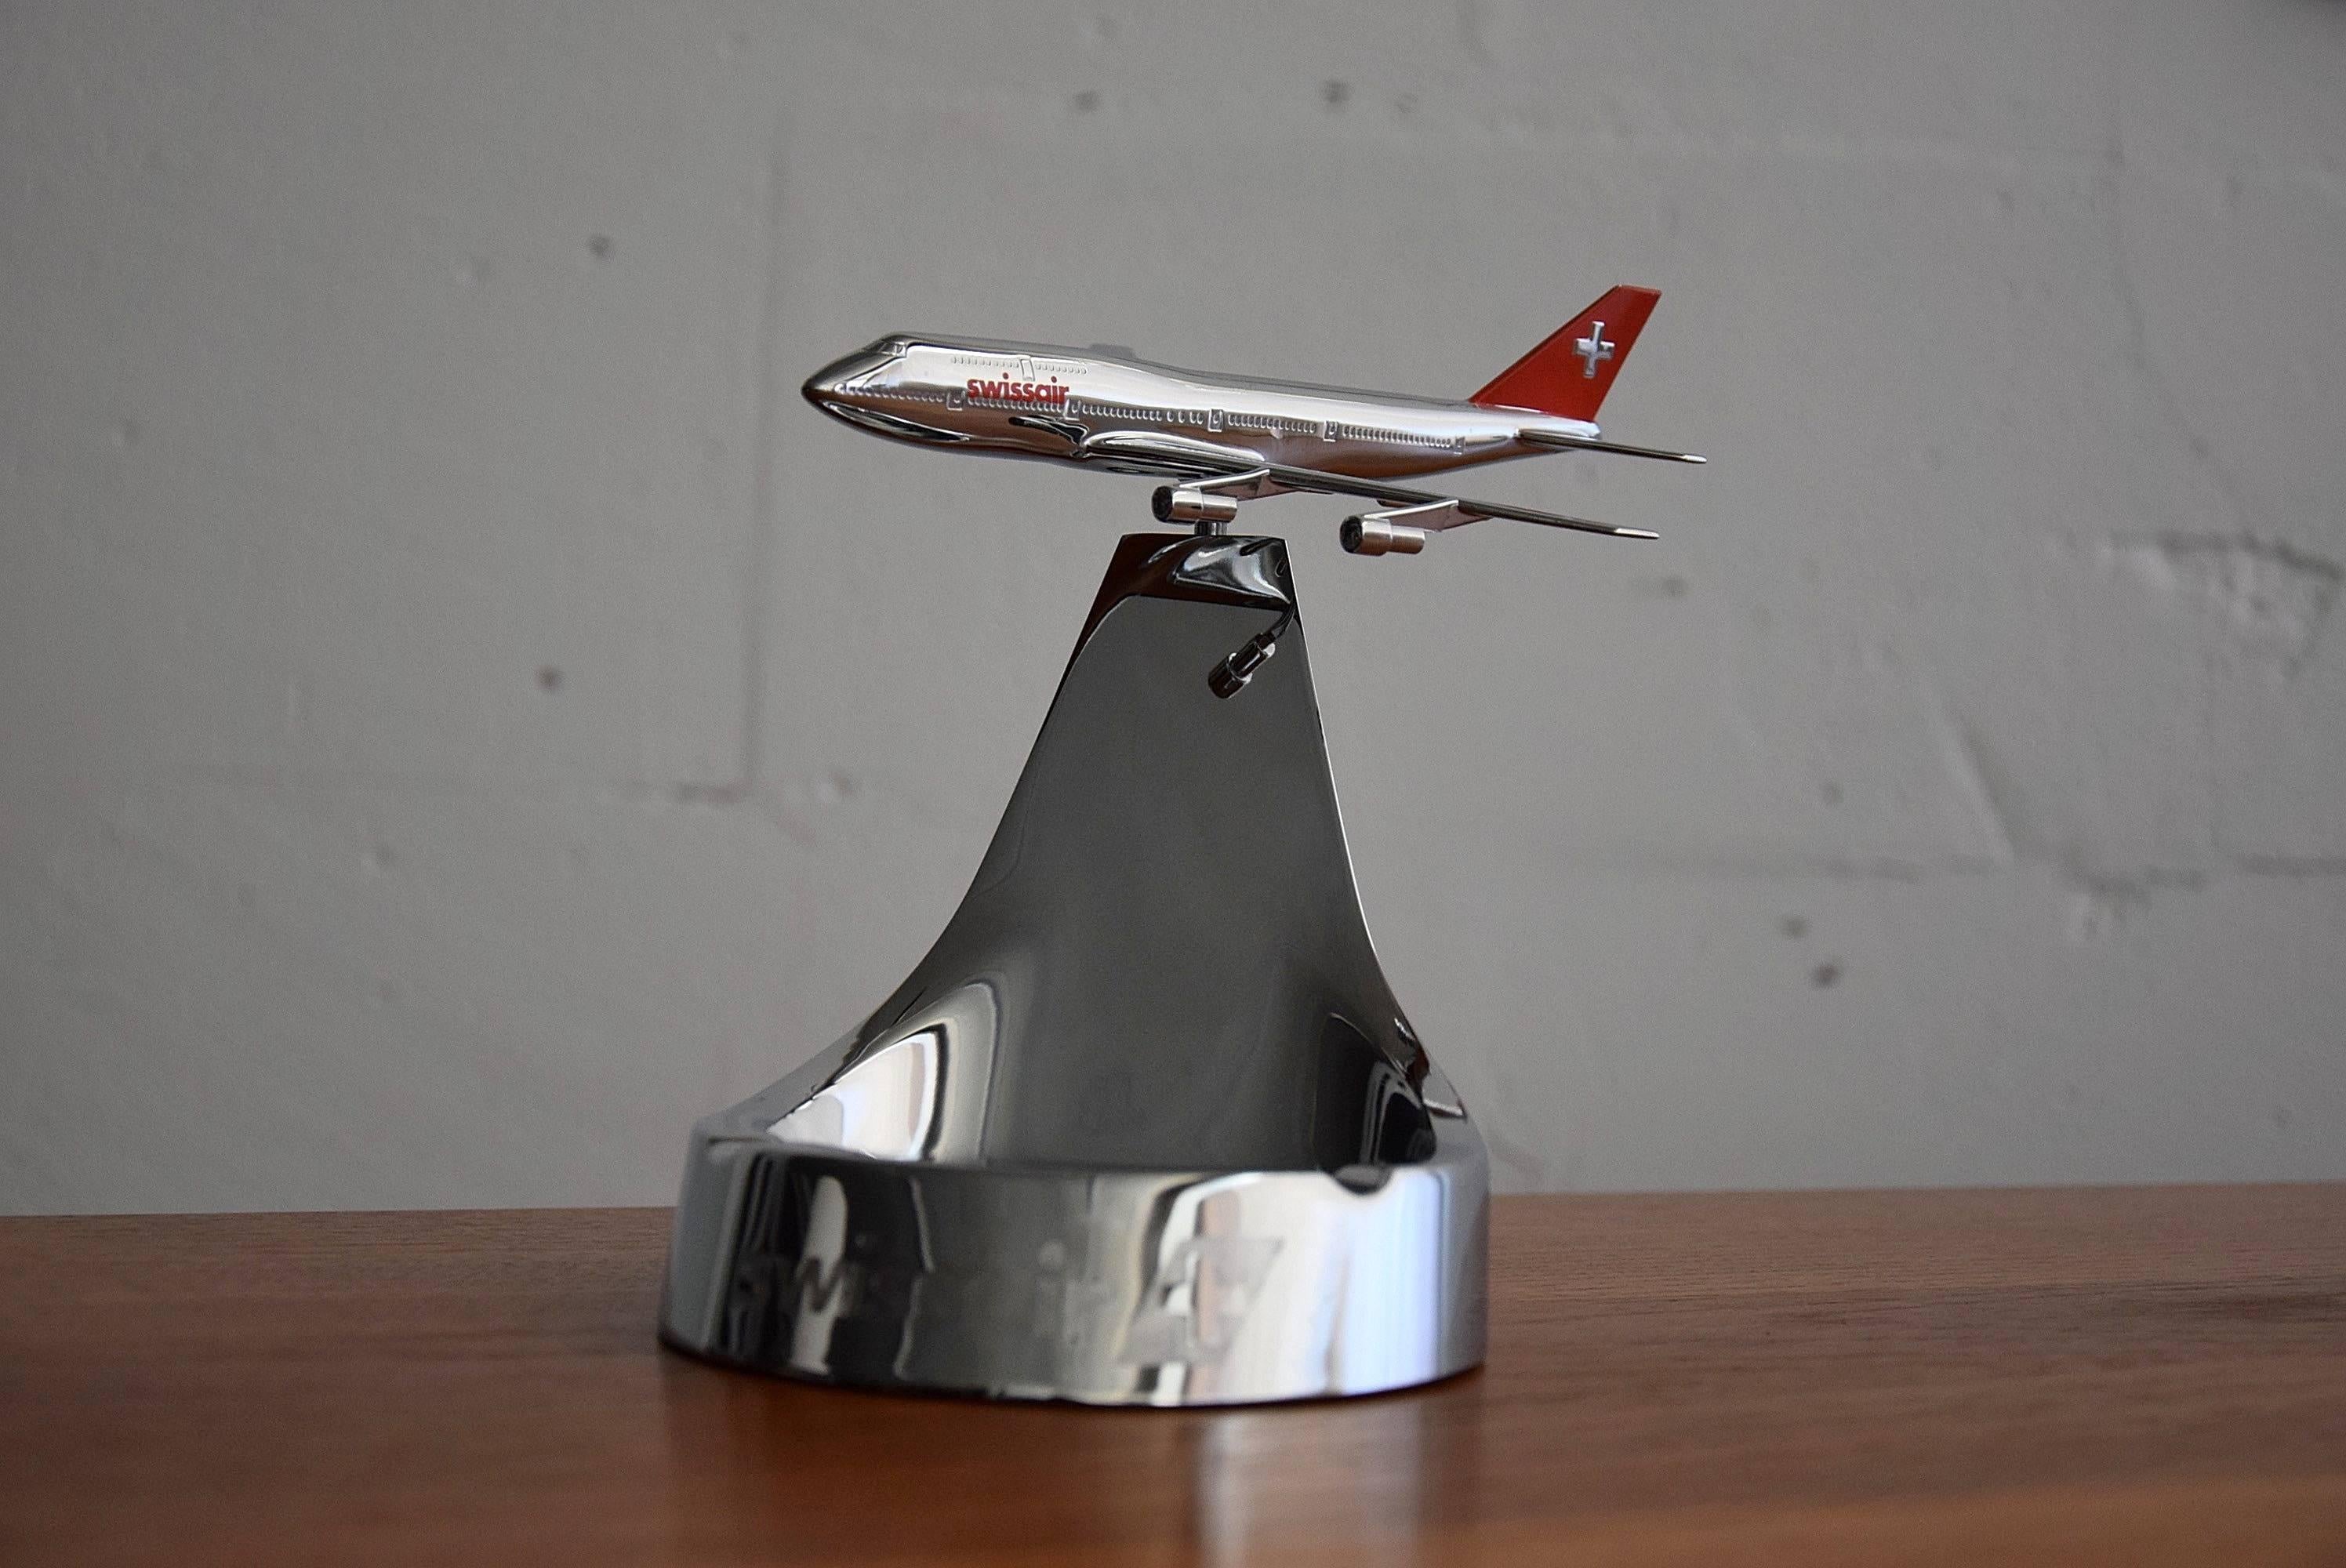 Beautifull Swissair 1980s Boeing 737-300 ashtray in mint condition.

Made in Switzerland by Buhler.